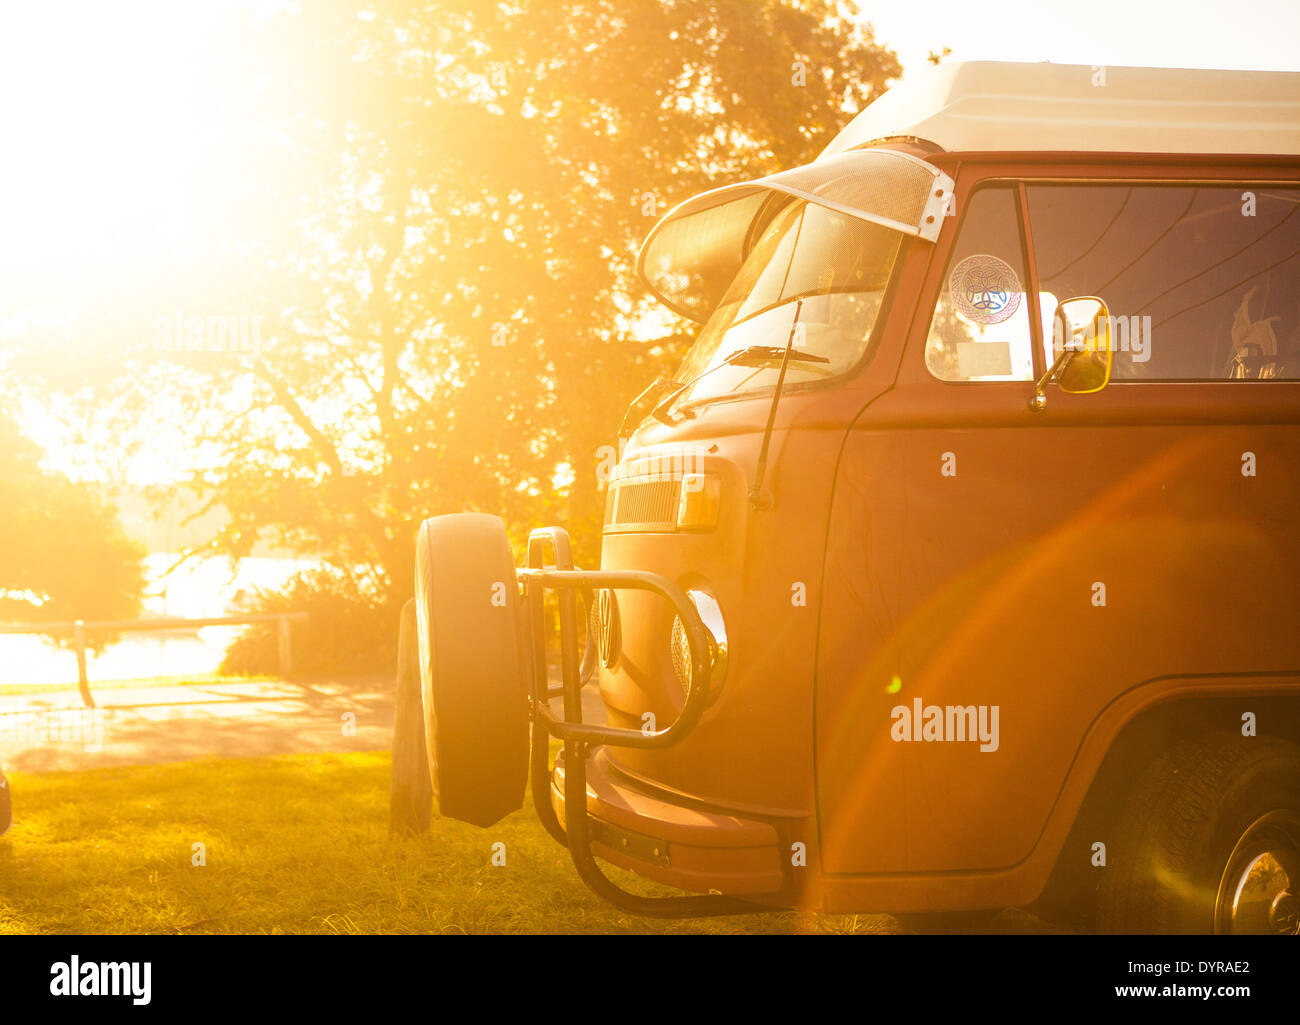 An old VW camper van photographed in the early evening Stock Photo